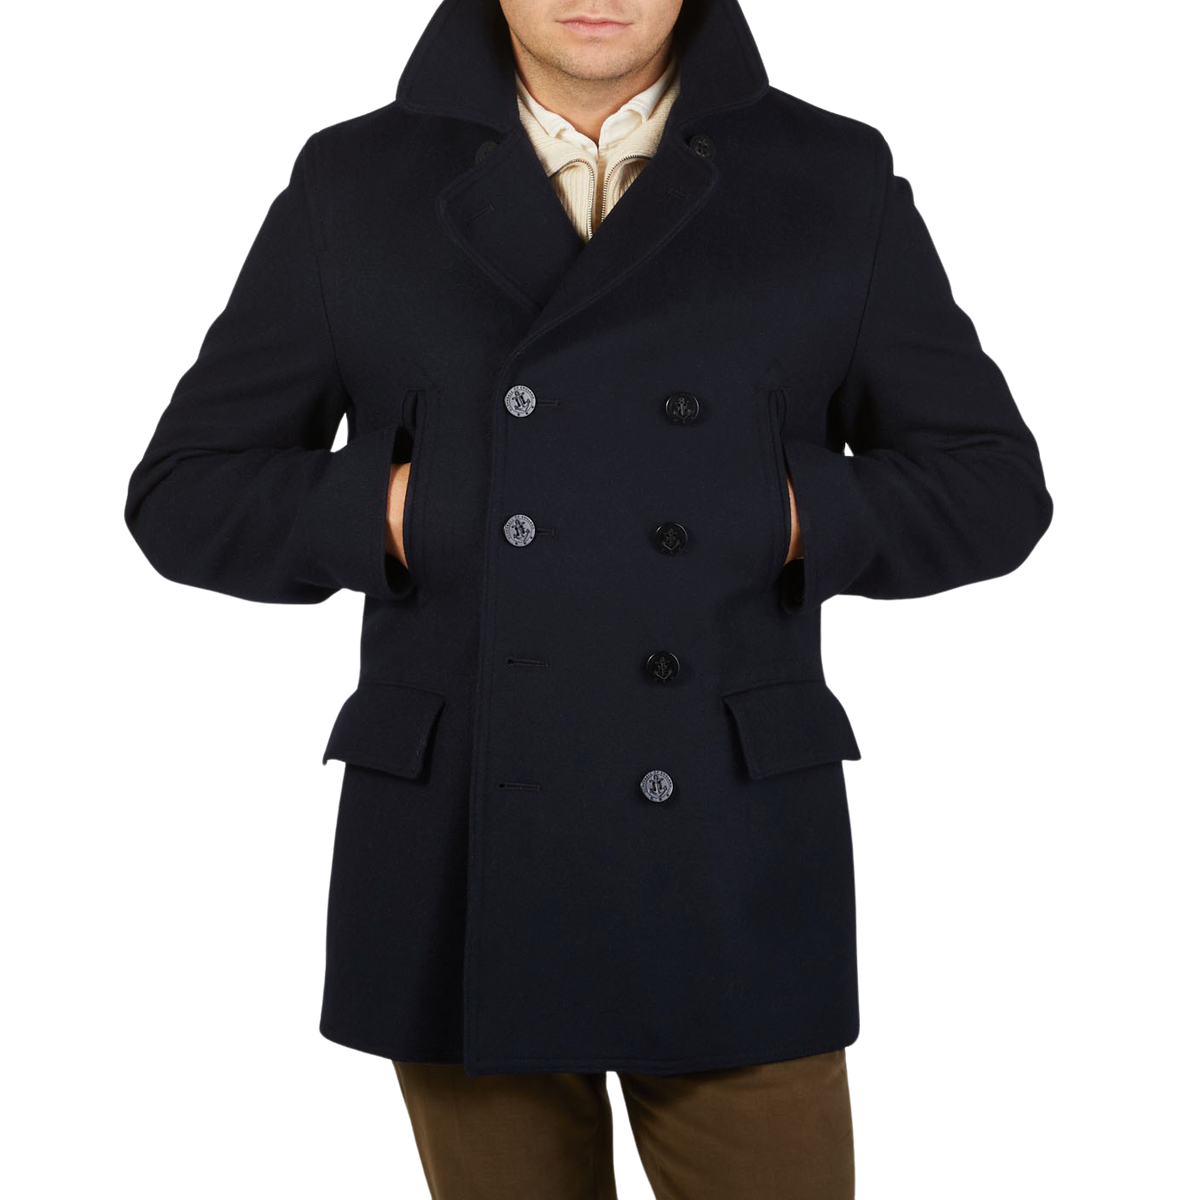 A man wearing a navy Gloverall Navy Wool Churchill Peacoat made of English Melton wool.